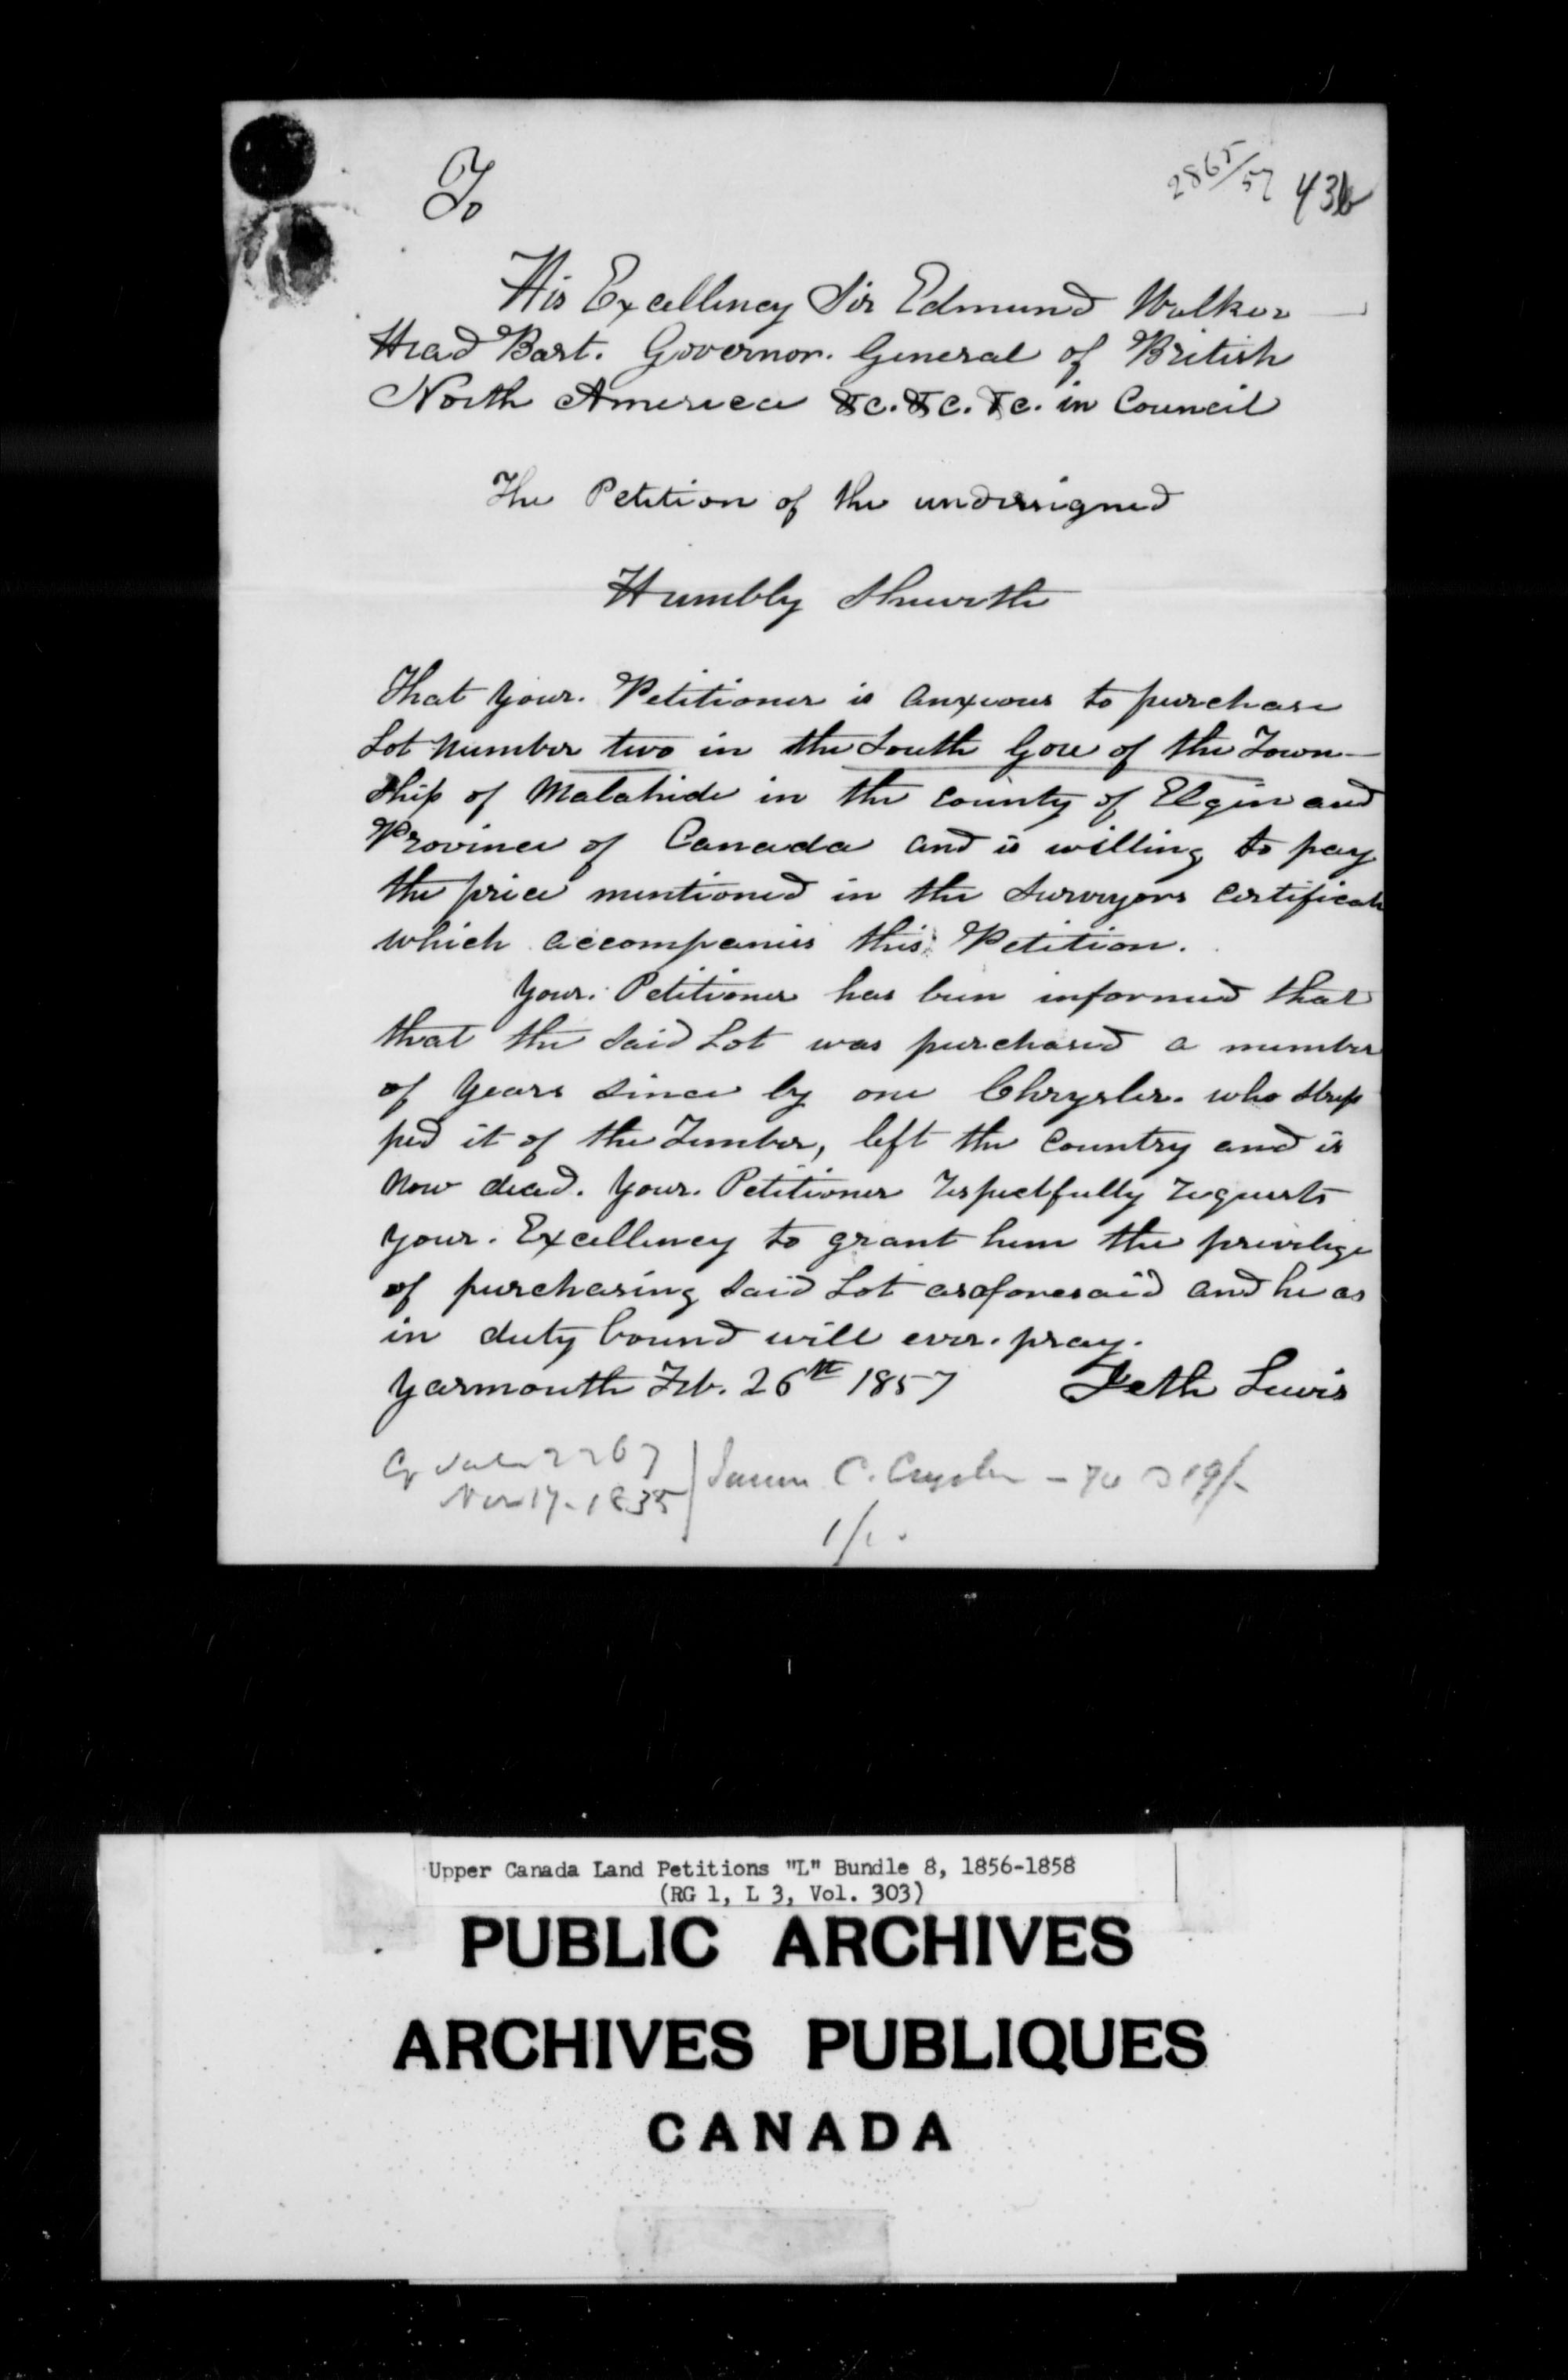 Title: Upper Canada Land Petitions (1763-1865) - Mikan Number: 205131 - Microform: c-2136